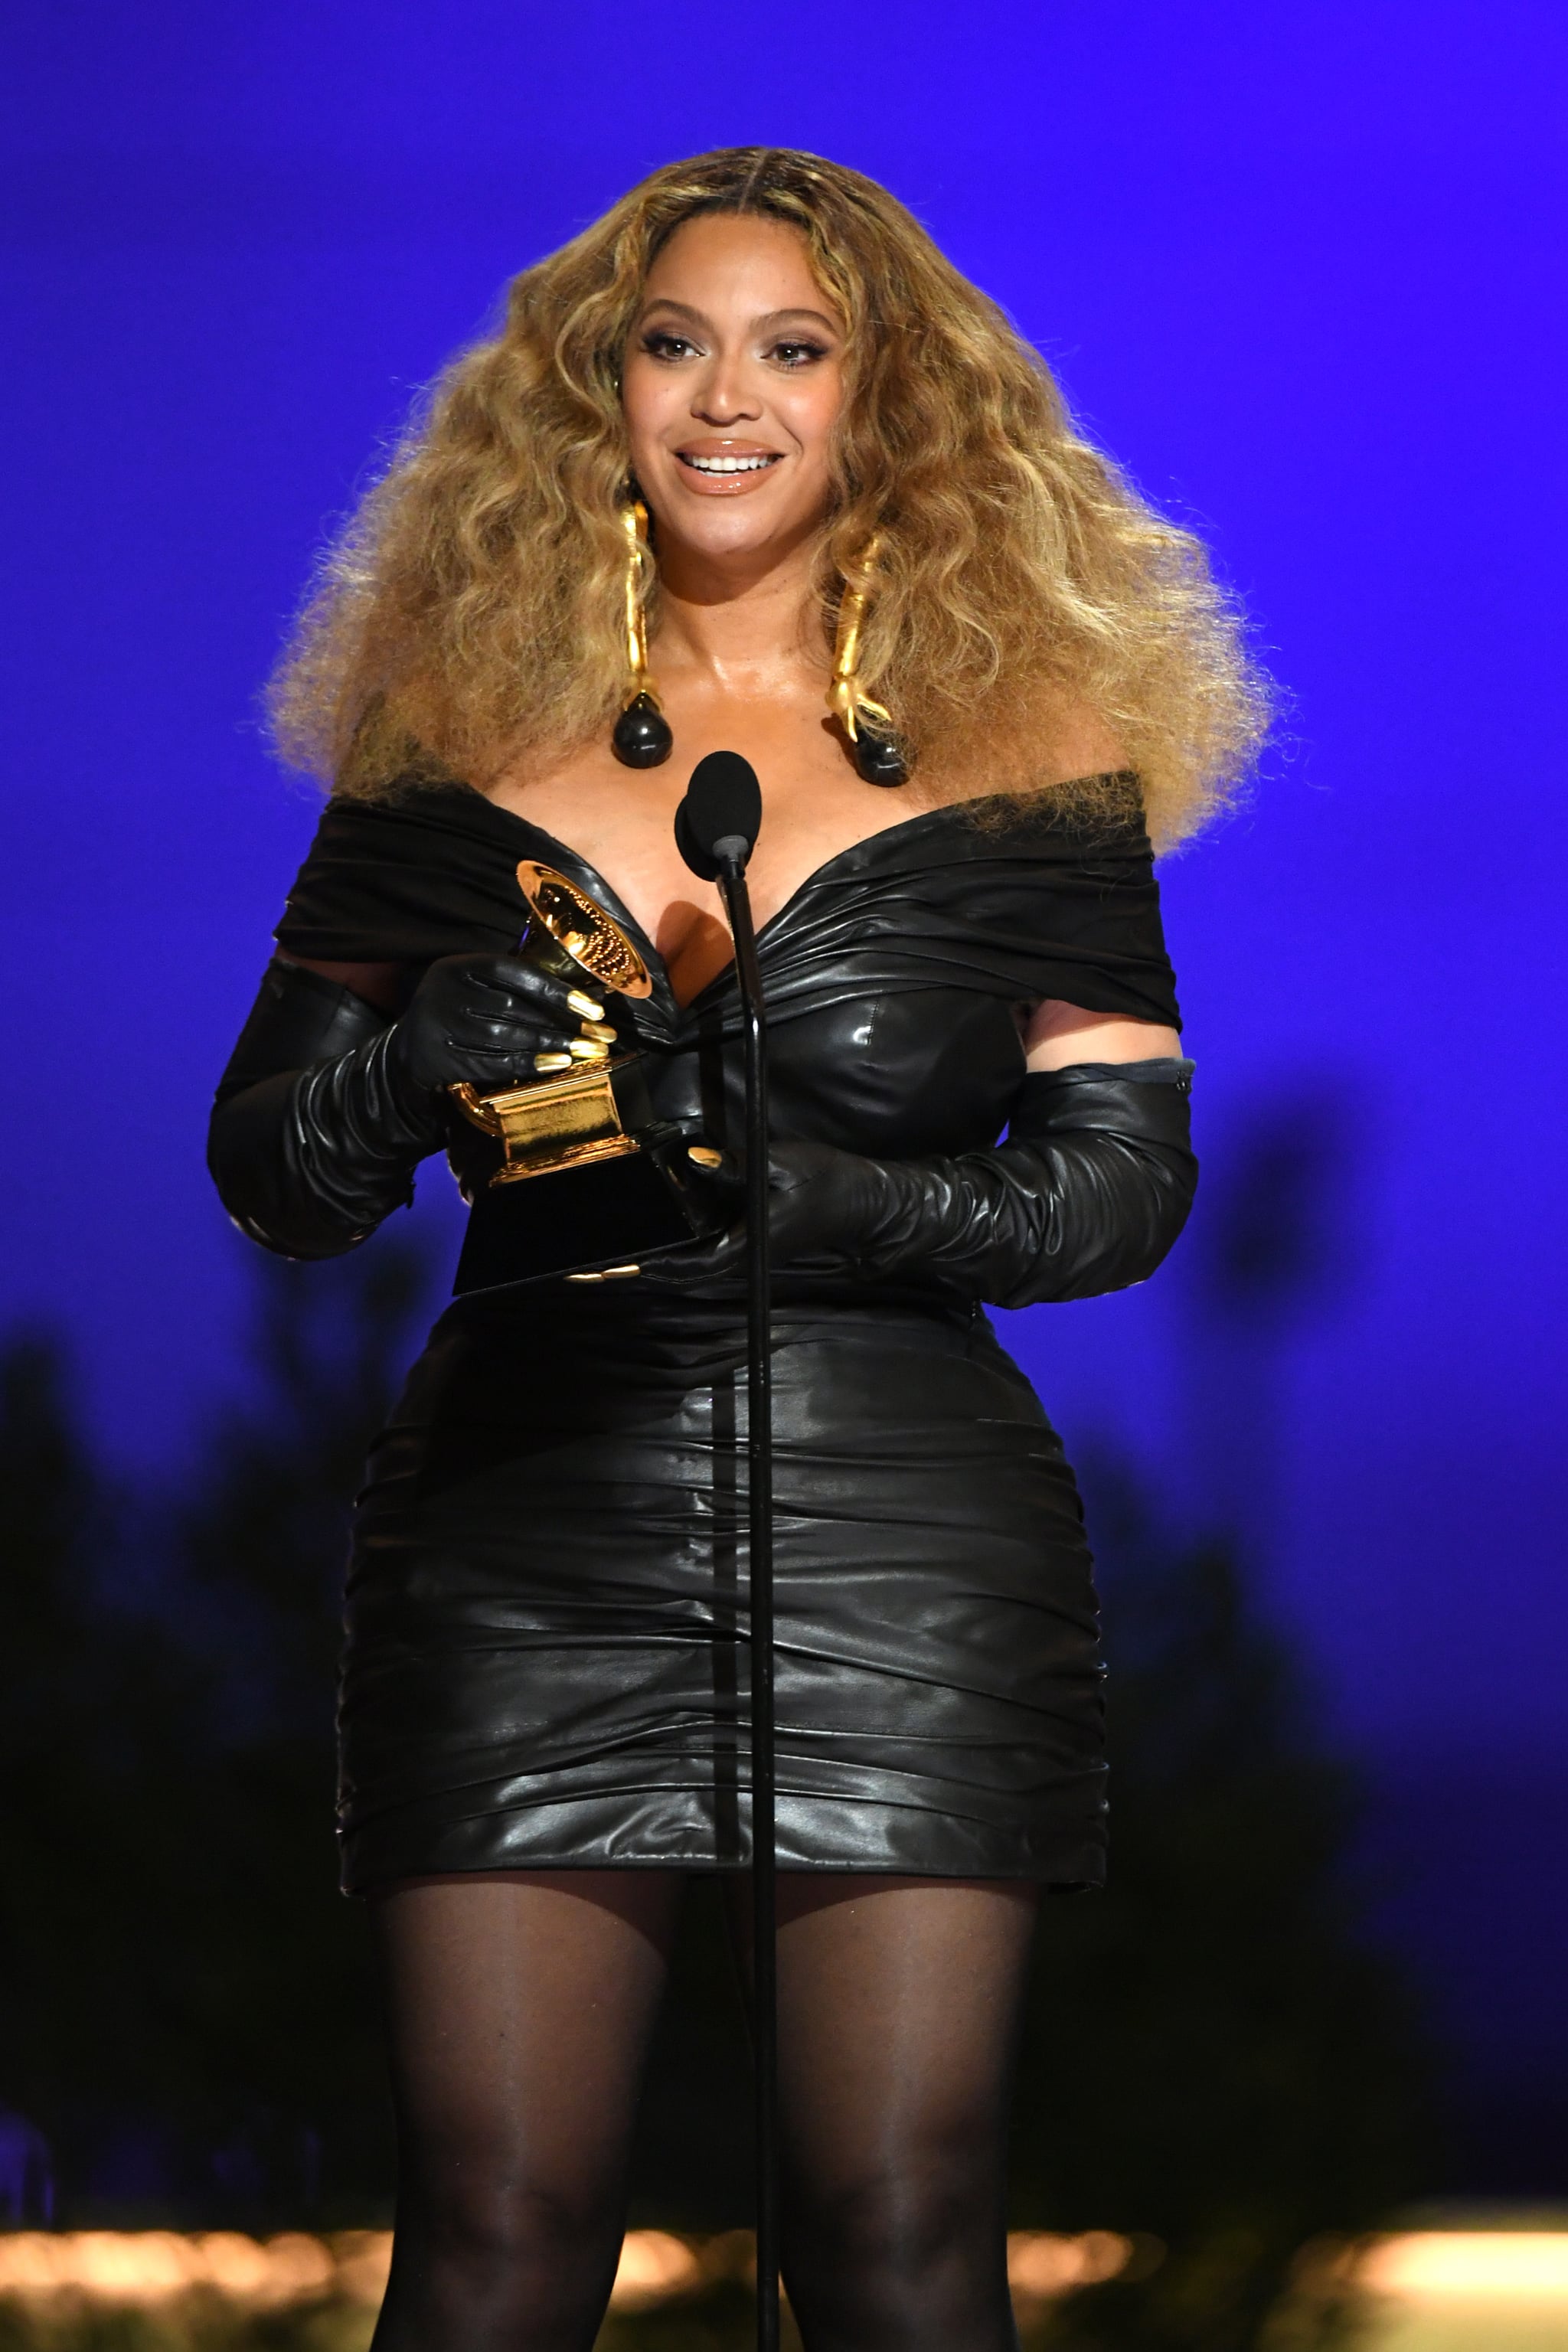 LOS ANGELES, CALIFORNIA - MARCH 14: Beyoncé accepts the Best R&B Performance award for 'Black Parade' onstage during the 63rd Annual GRAMMY Awards at Los Angeles Convention Centre on March 14, 2021 in Los Angeles, California. (Photo by Kevin Winter/Getty Images for The Recording Academy)